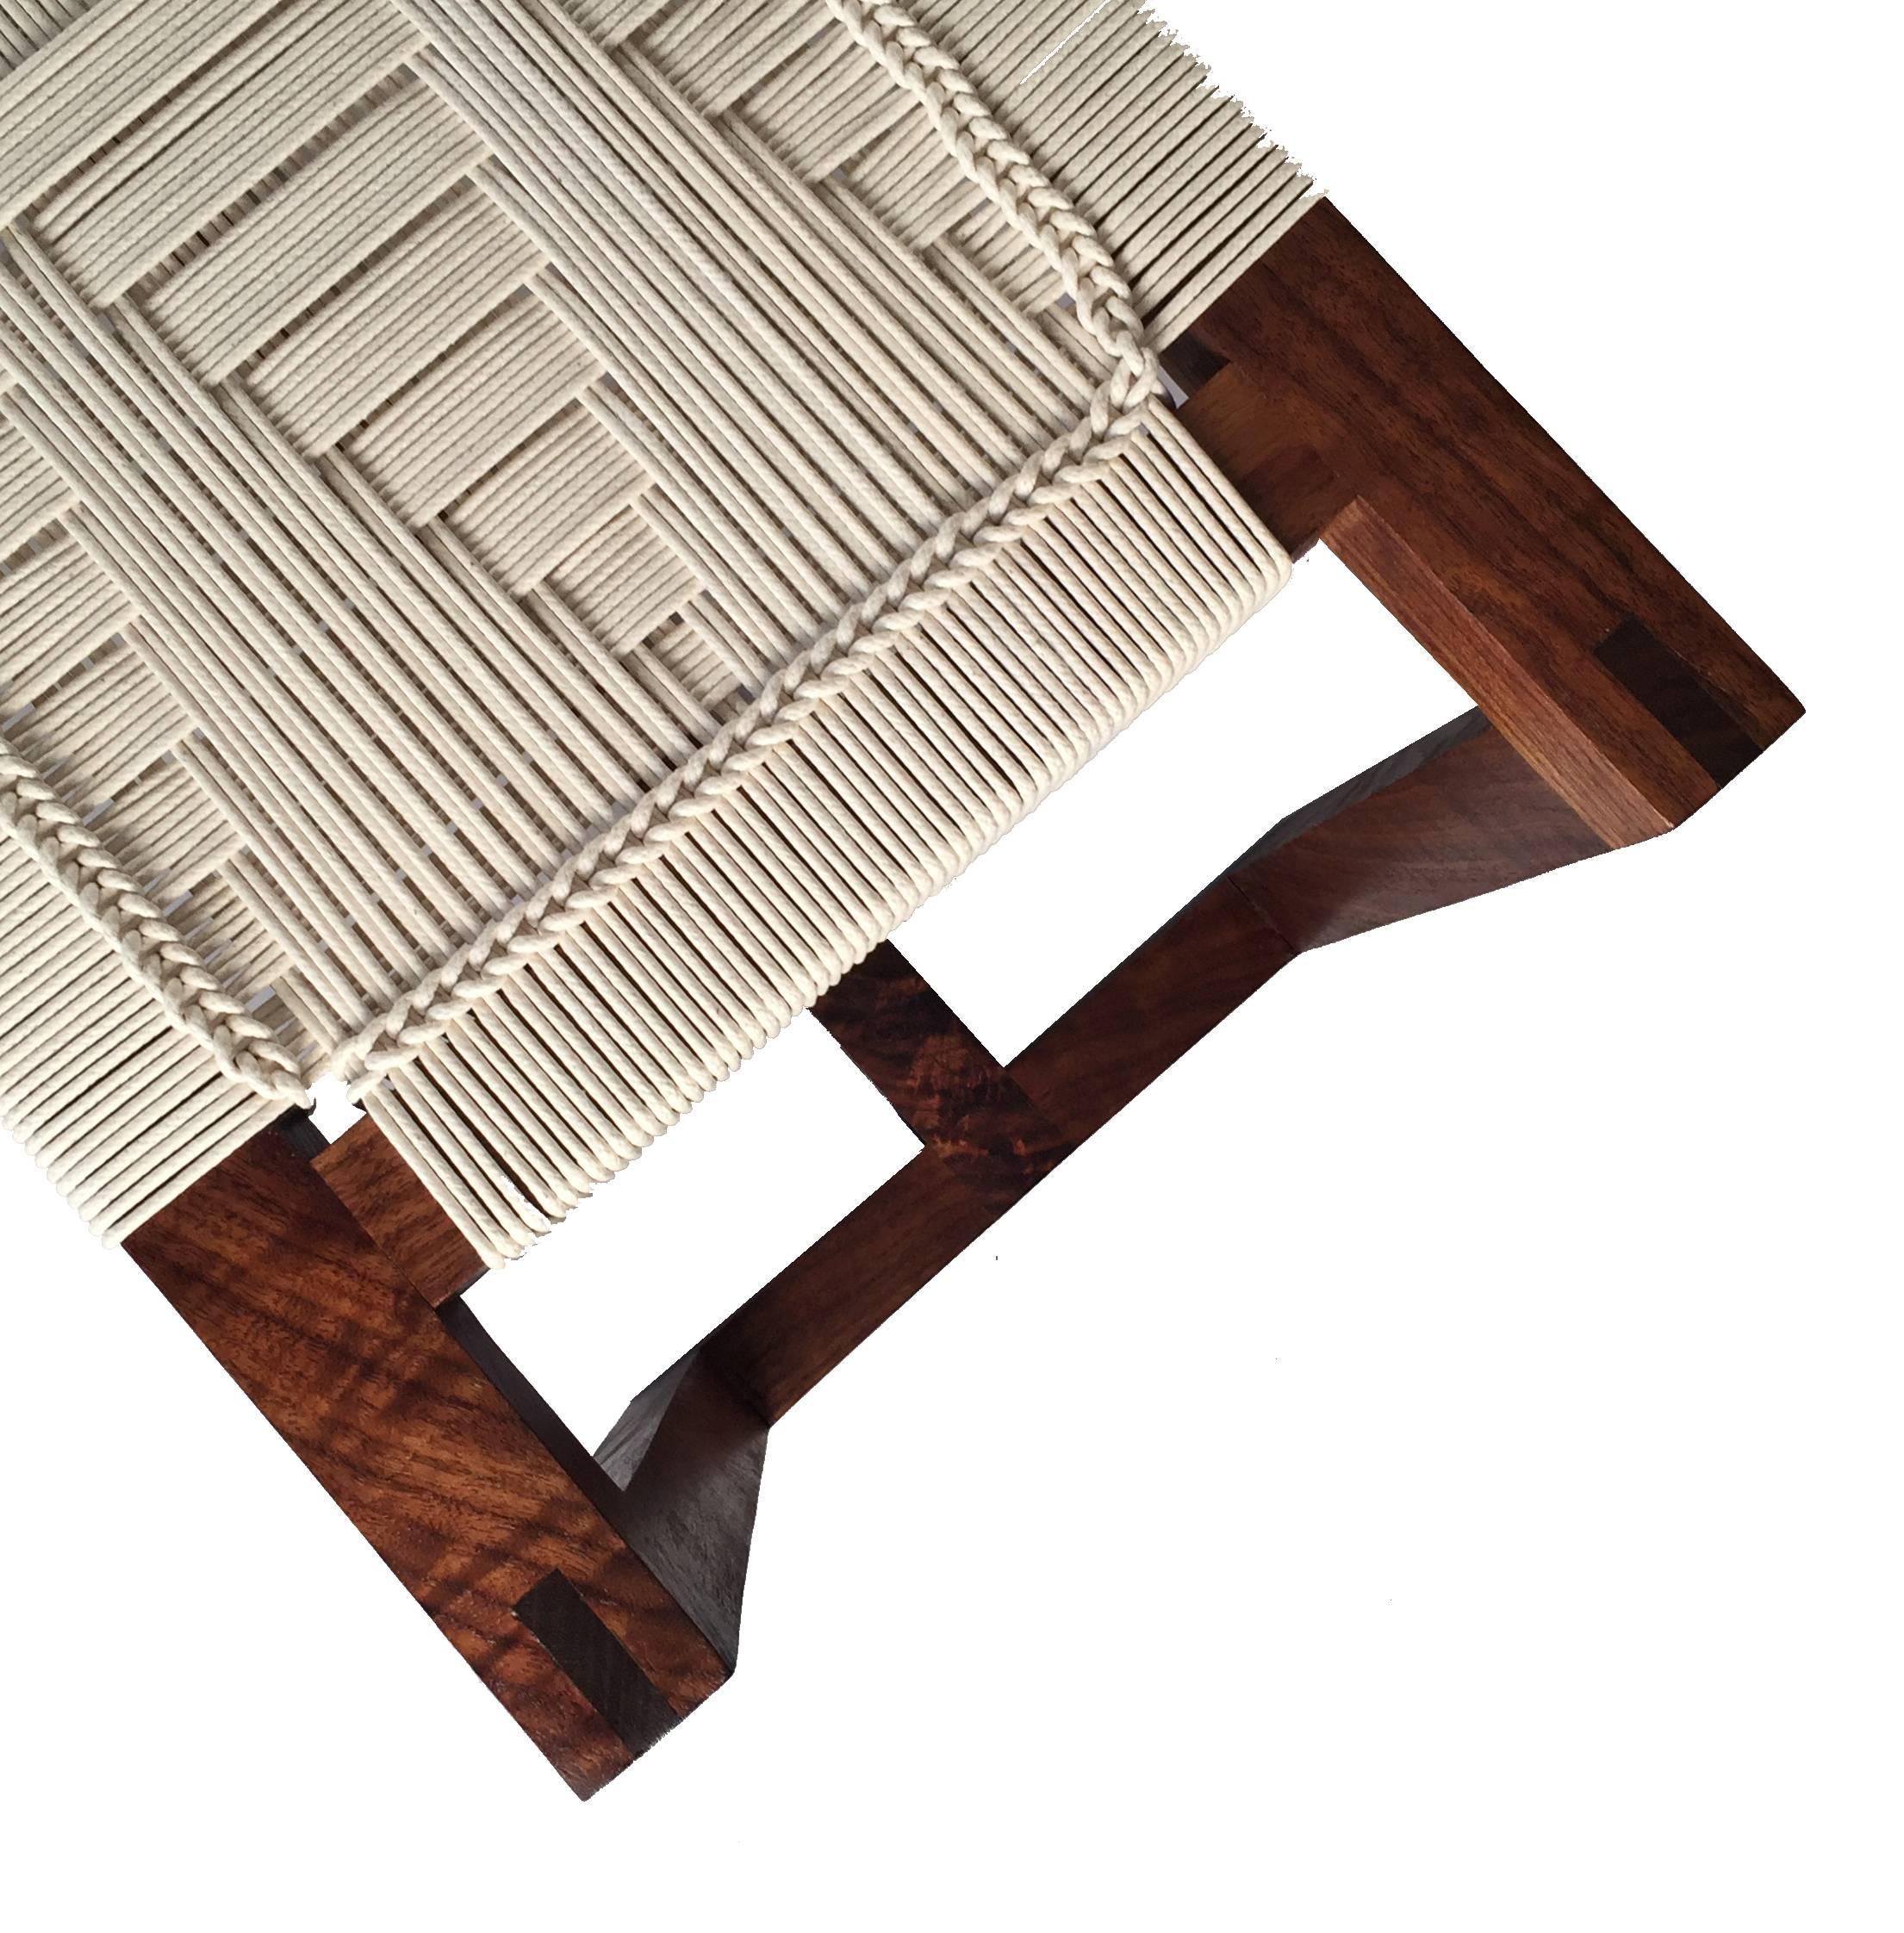 The fireside bench is made in white oak or ash and features bridle joint and peg joint detailing. Each handwoven seat is made with solid braid cotton cord. Customizable sizing, color and patterning is available to trade.

Custom orders have a lead